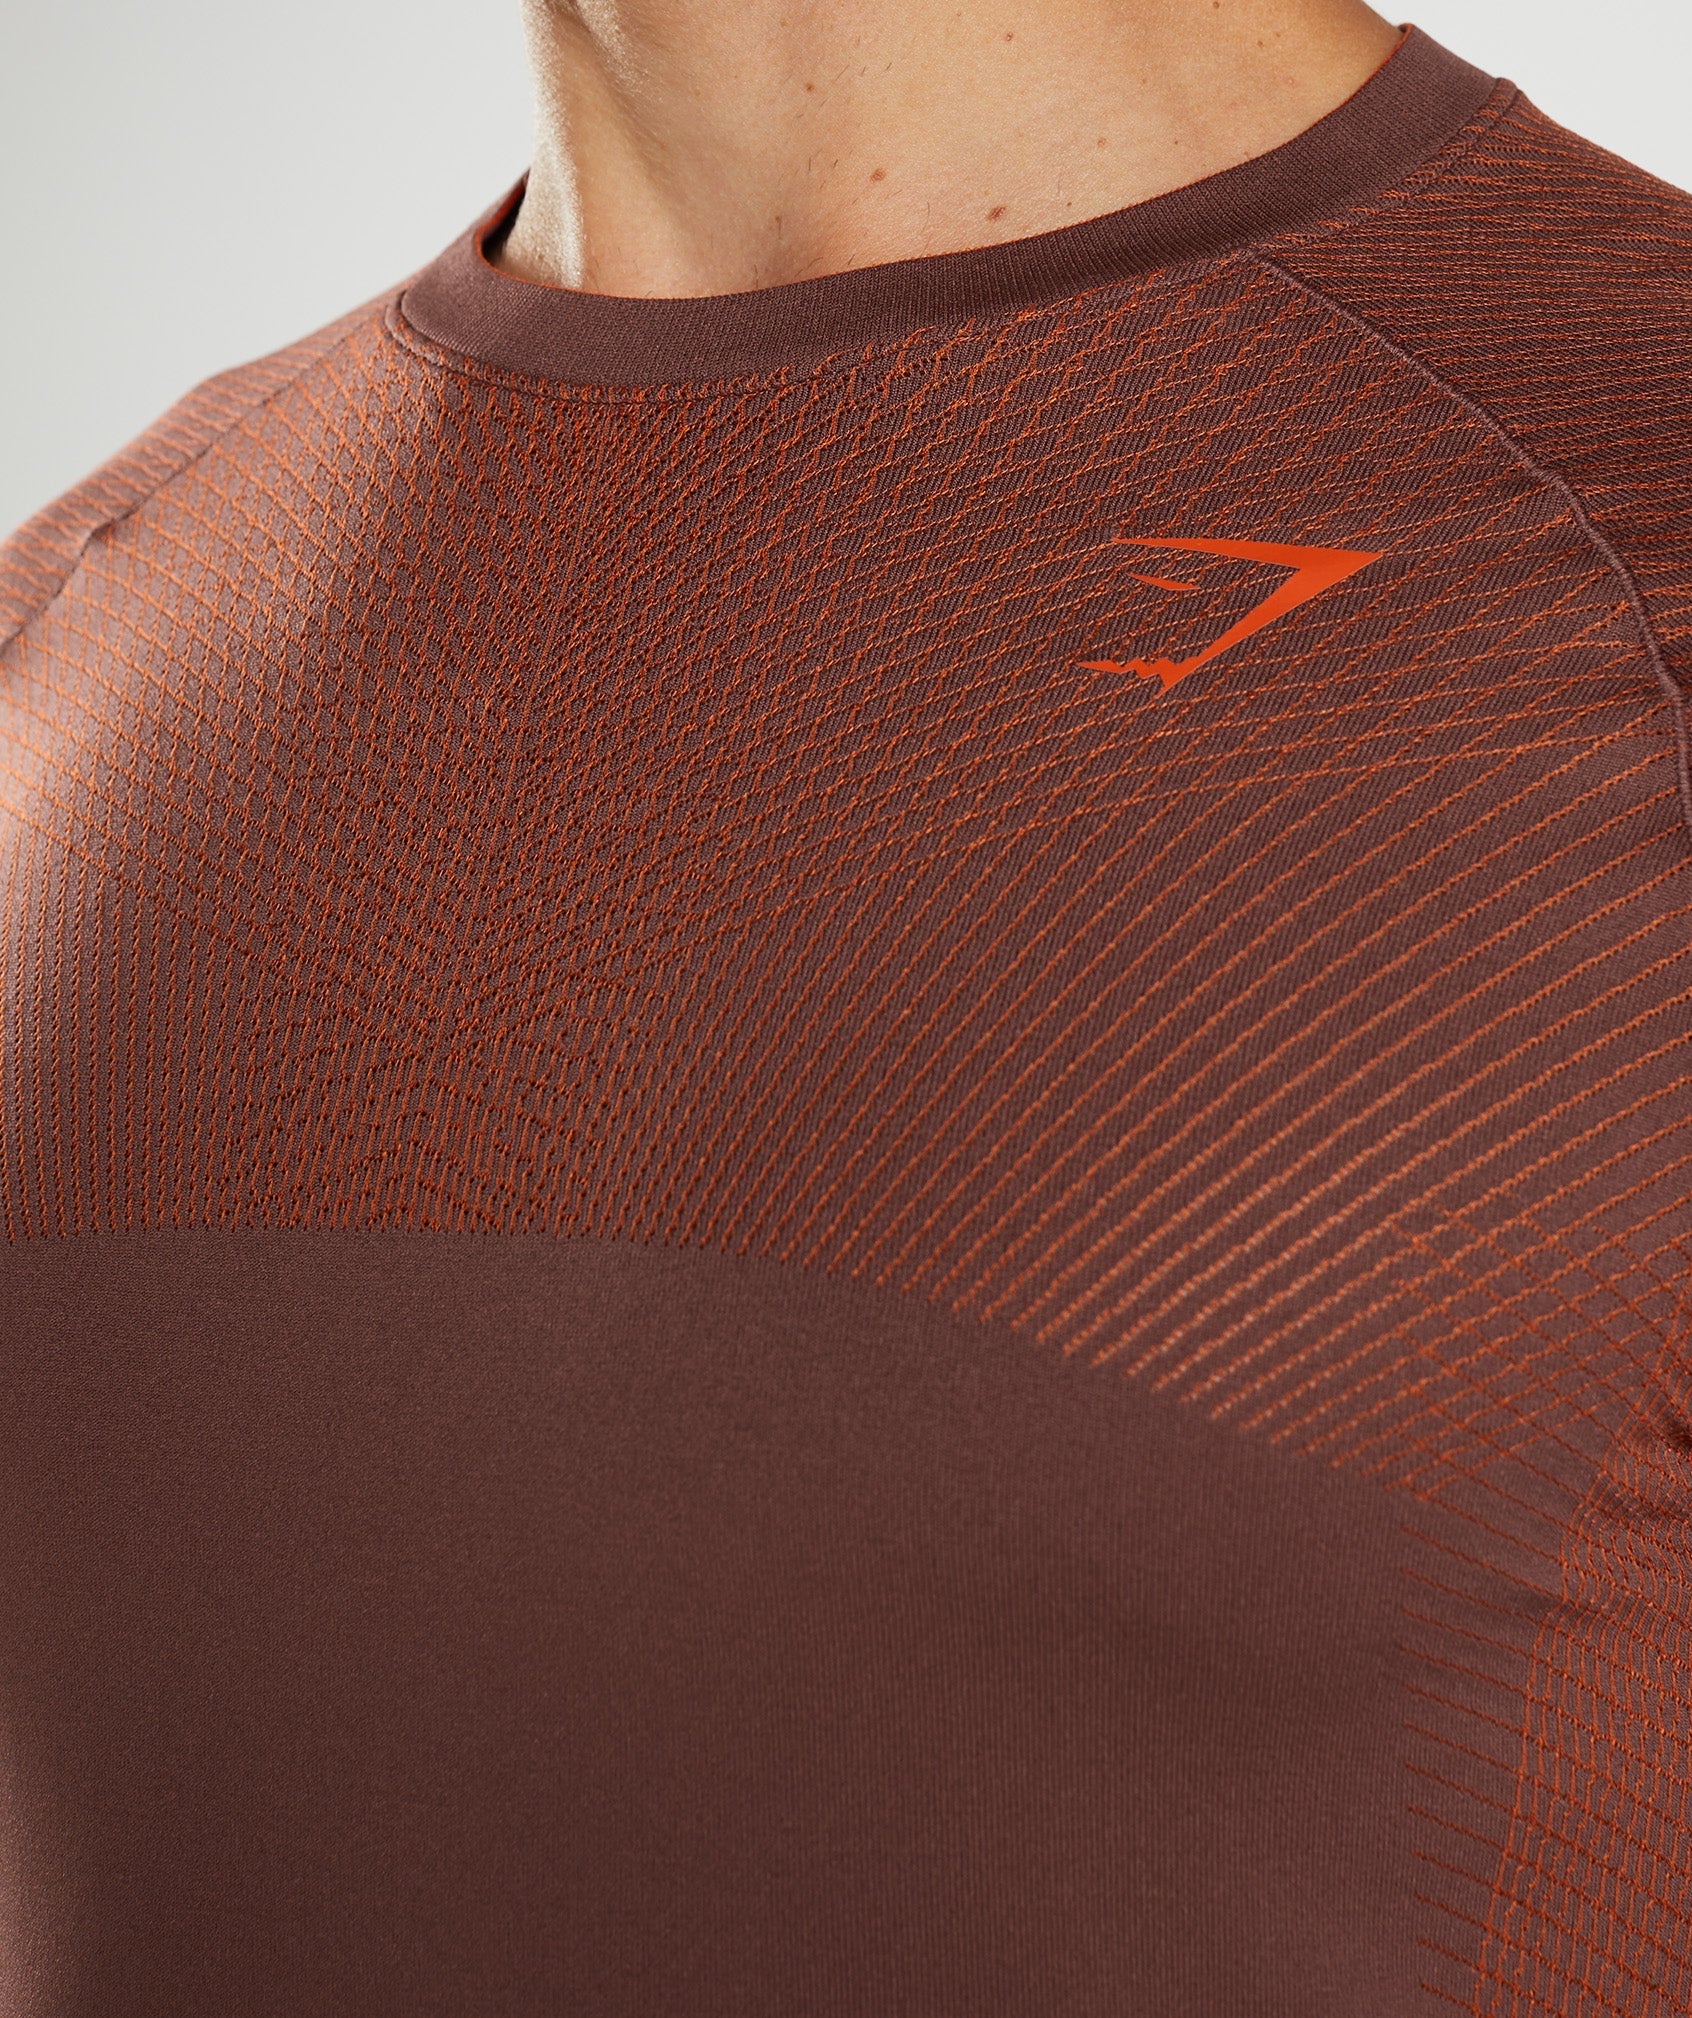 Apex Seamless Long Sleeve T-Shirt in Cherry Brown/Pepper Red